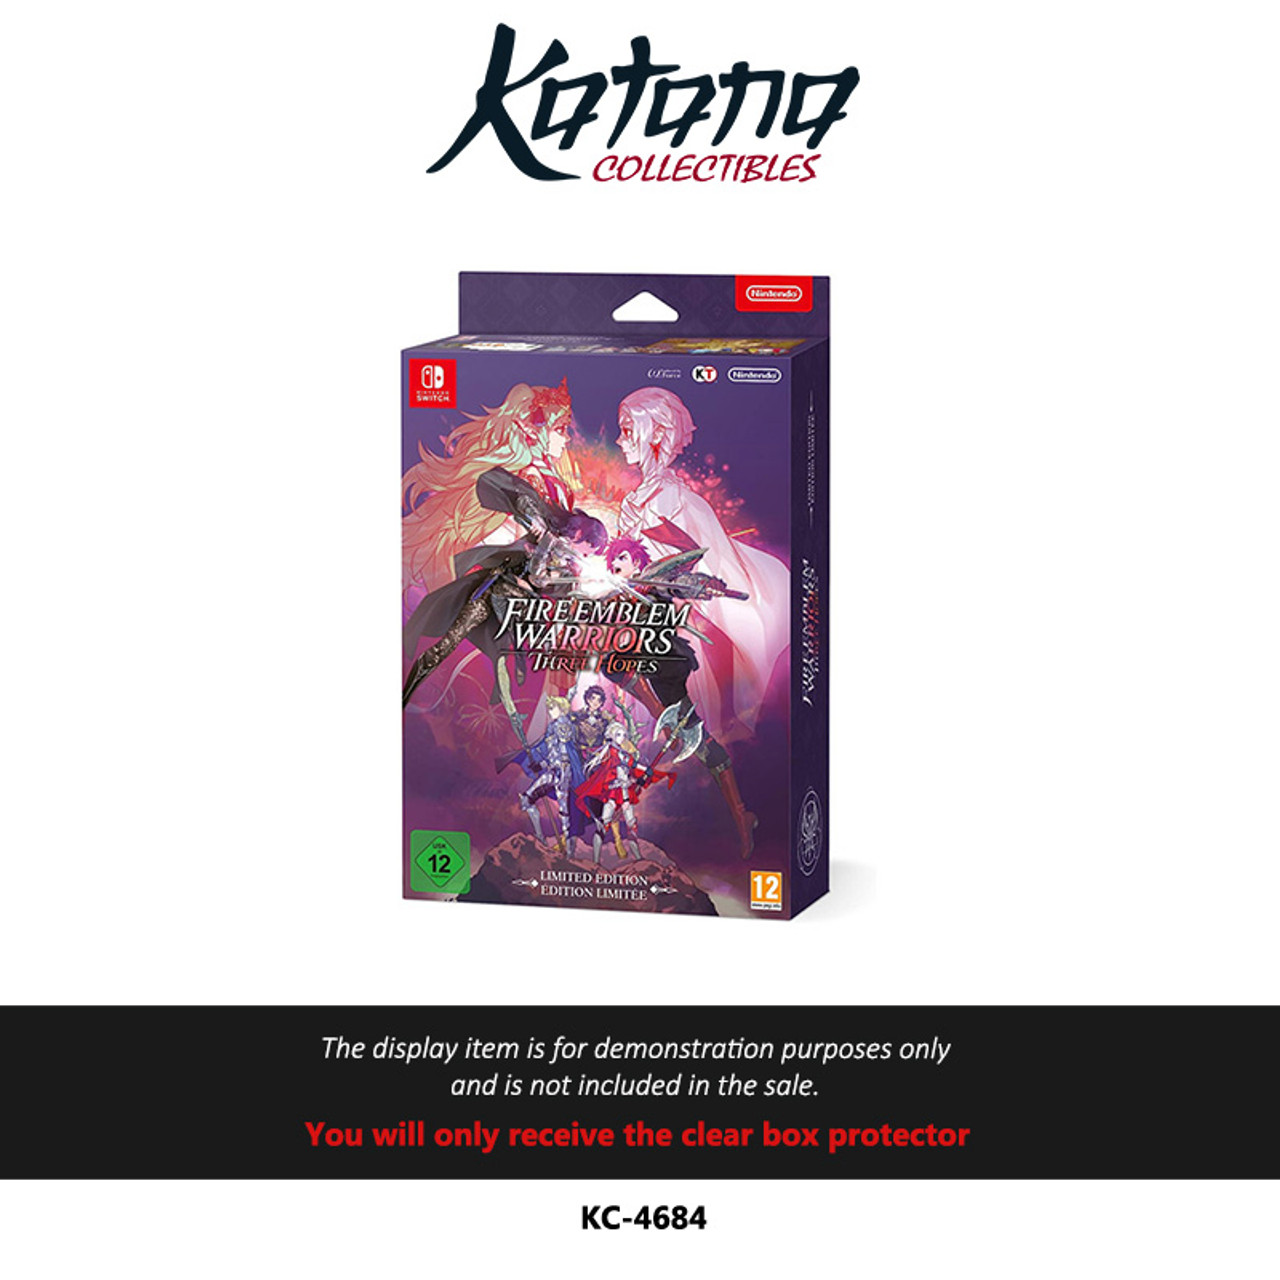 Katana Collectibles Protector For "Fire Emblem: Thee Hope Collector's Limited, Italian Edition. Card Version